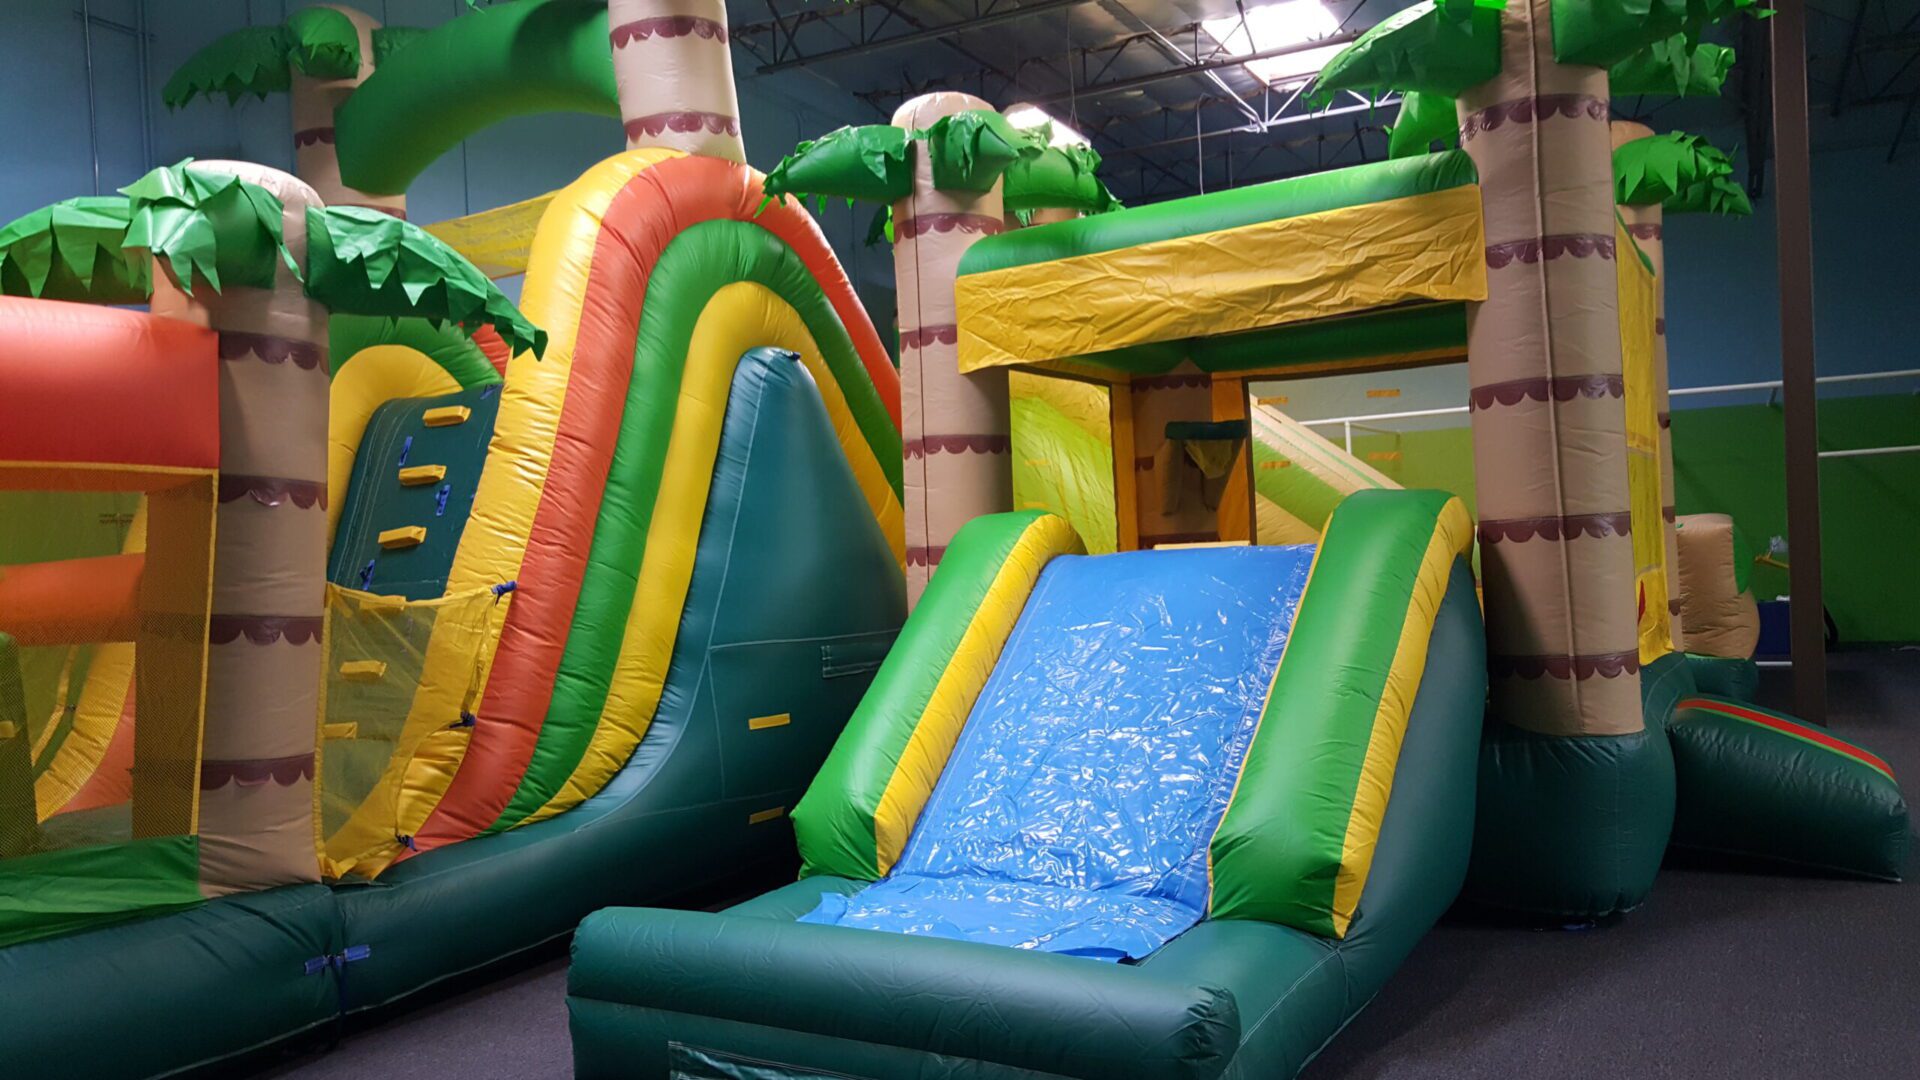 A bunch of inflated slides in the middle of an indoor playground.